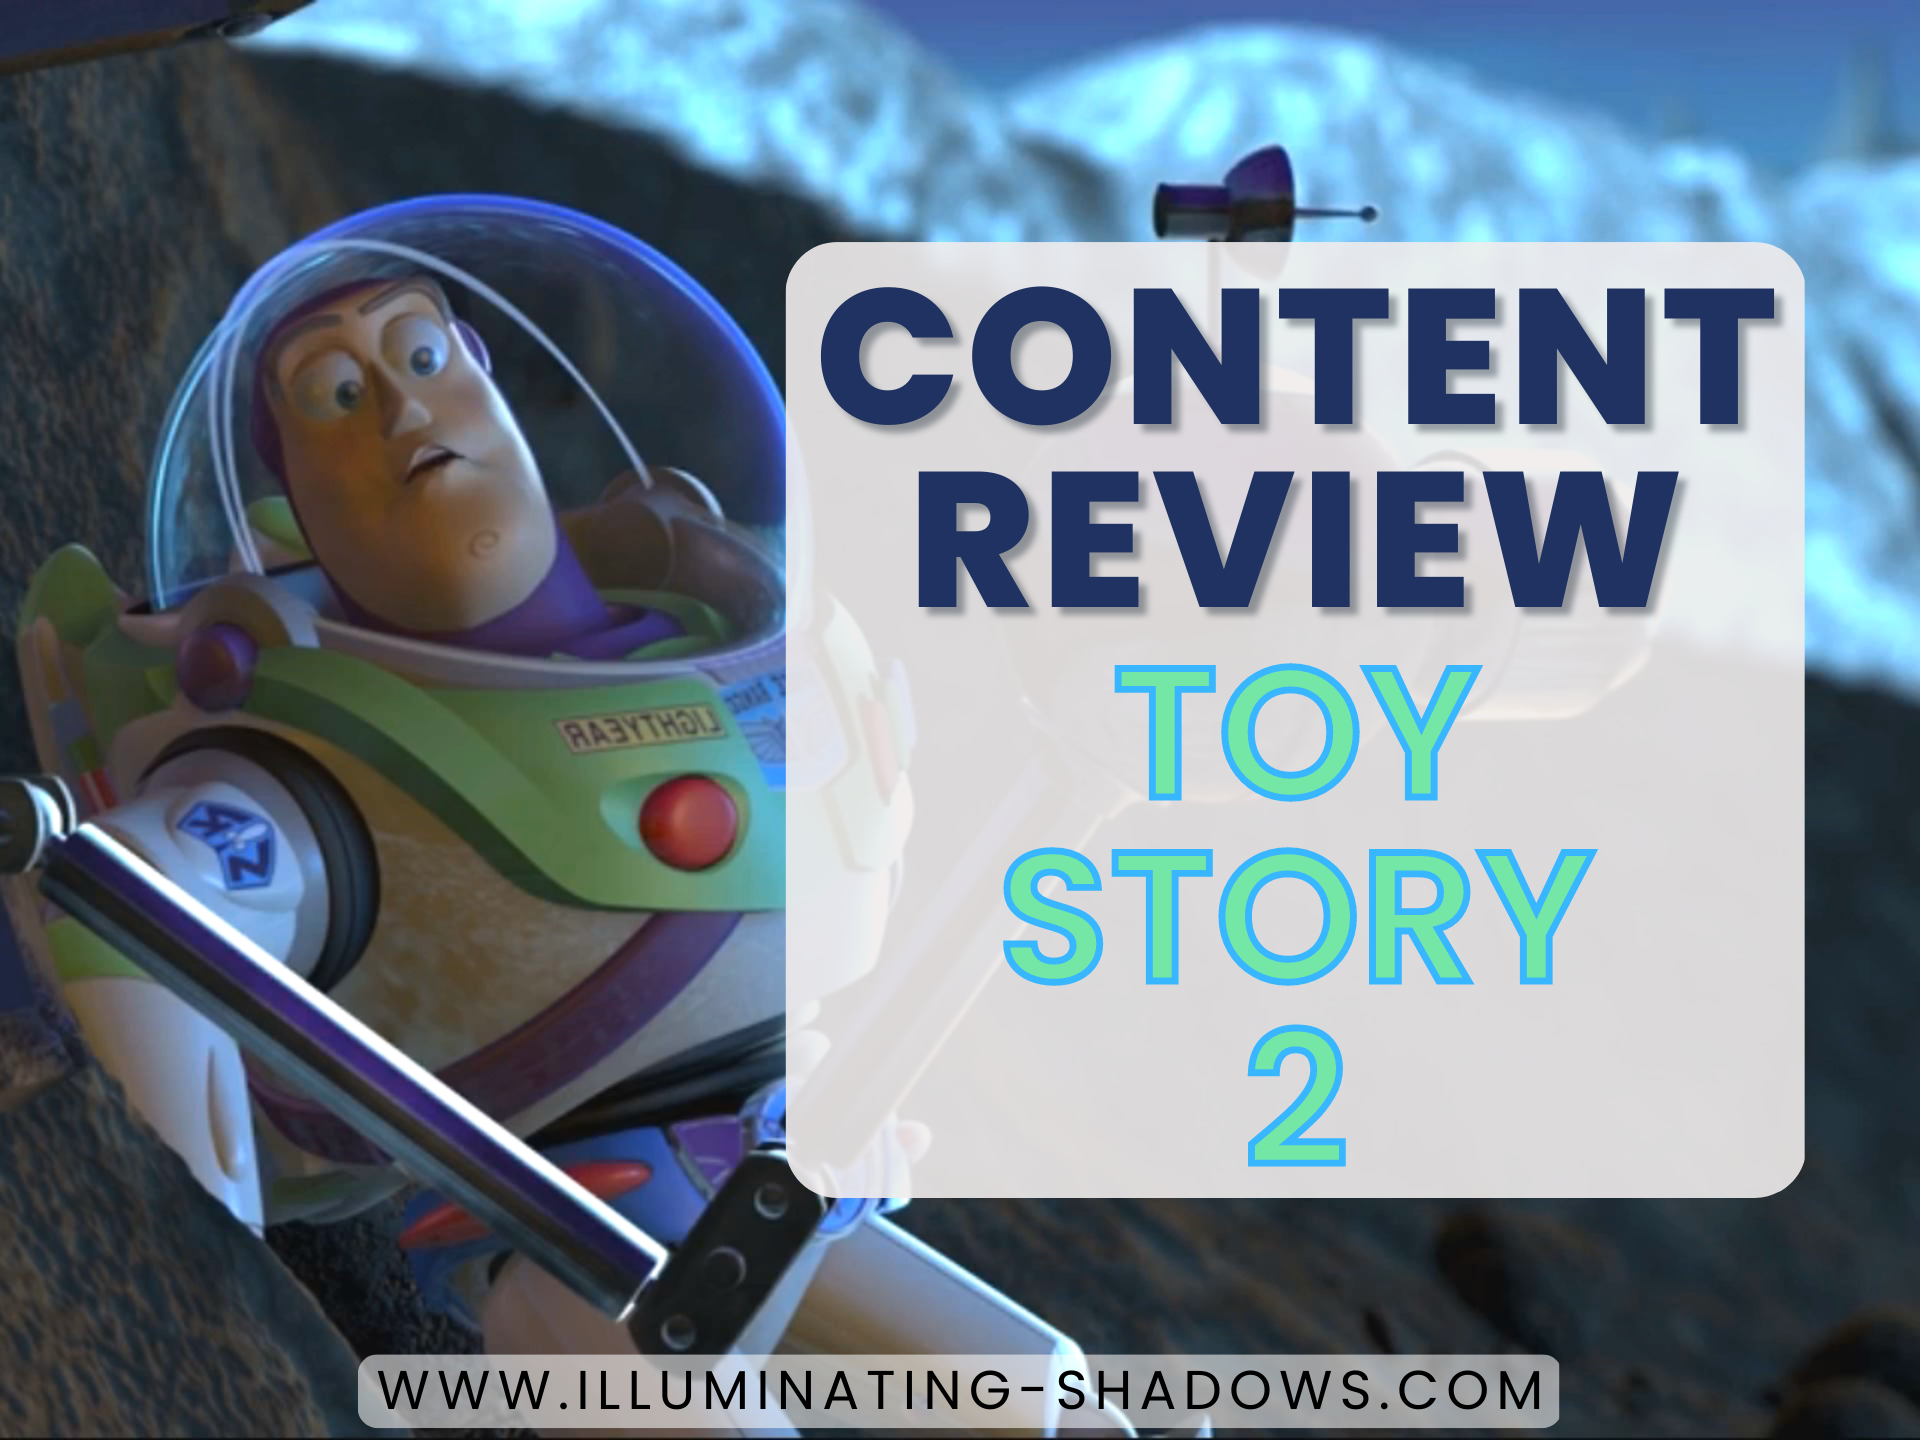 Toy Story 2 - Content Review - Picture of Buzz hiding